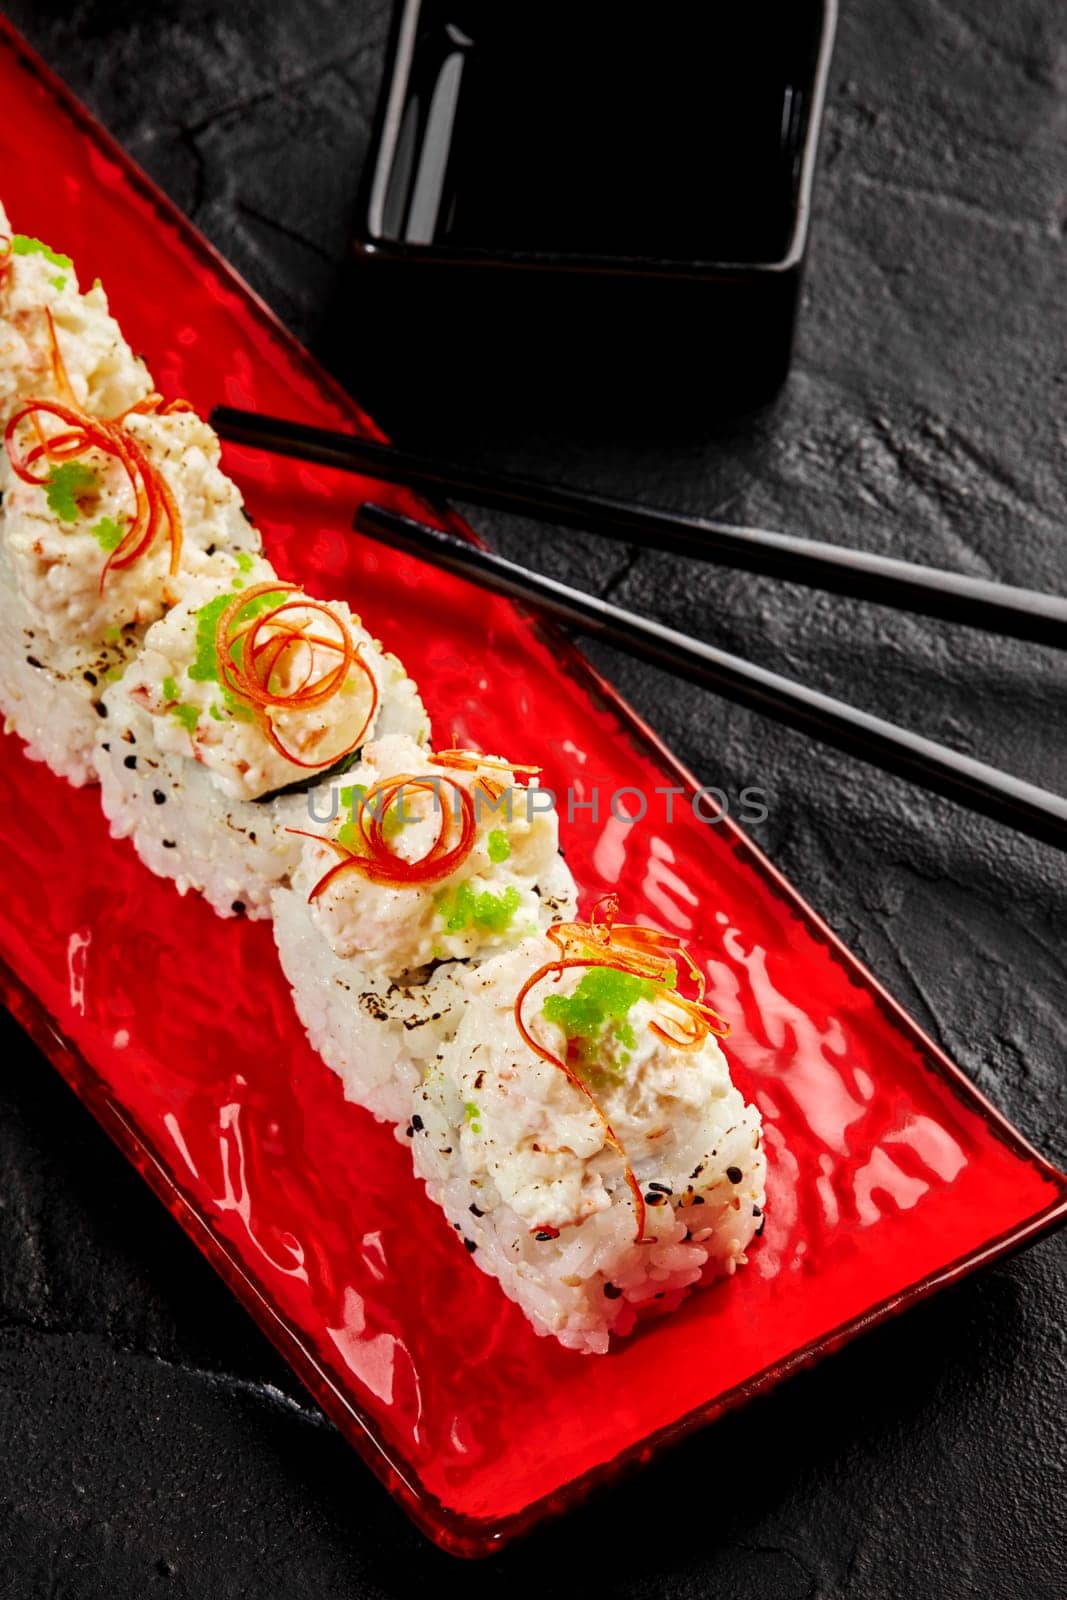 Spicy set of sushi rolls with creamy crab toppings garnished with green wasabi tobiko and fresh chili pepper shavings on red dish, accompanied by soy sauce and chopsticks on textured black background